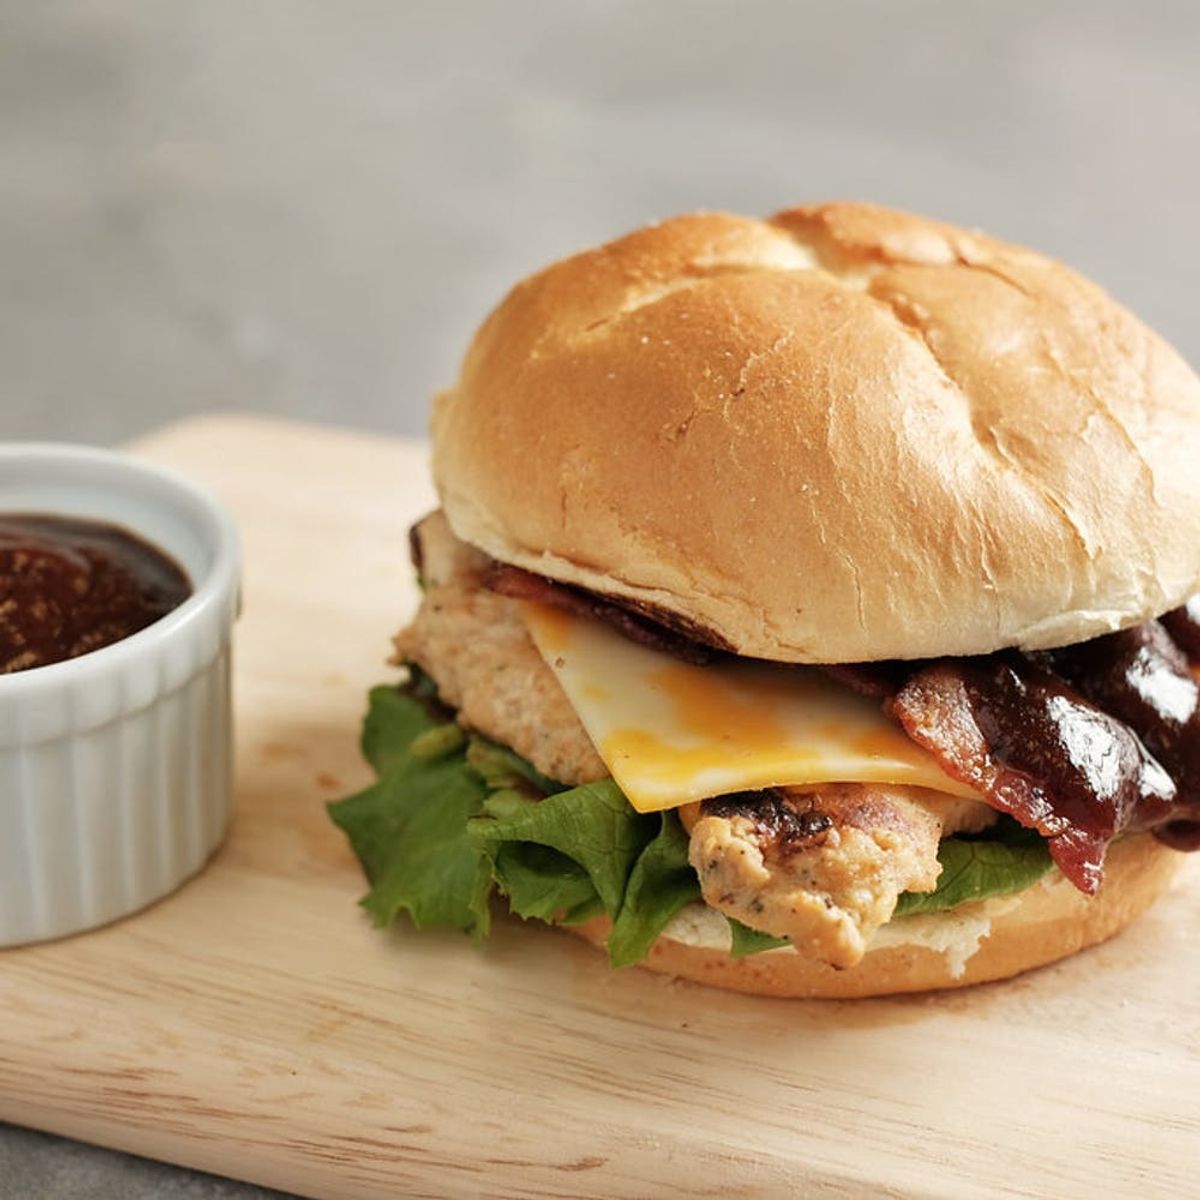 Chick-fil-A’s First New Sandwich in 3+ Years Is a Bacon BBQ Masterpiece